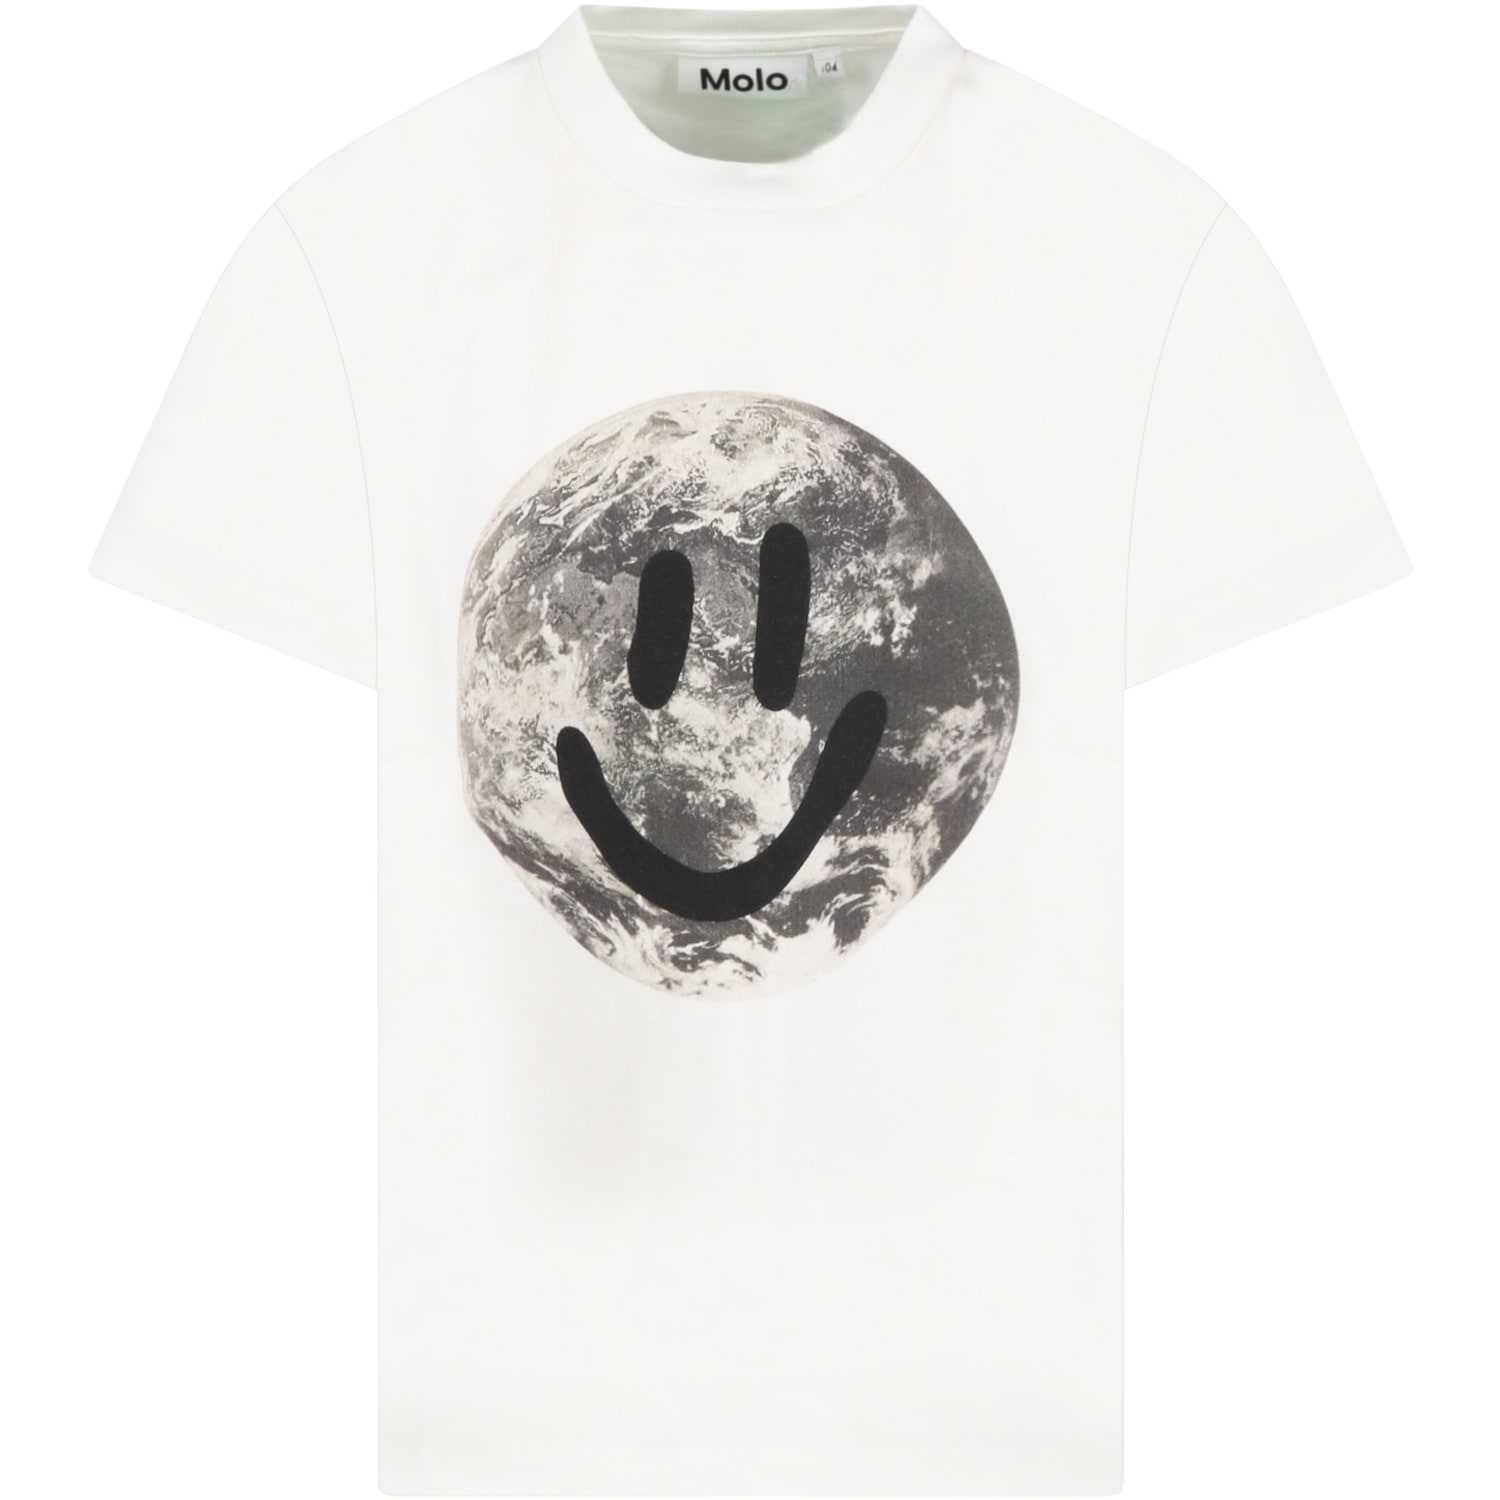 Molo White T-shirt For Kids With Smiling World